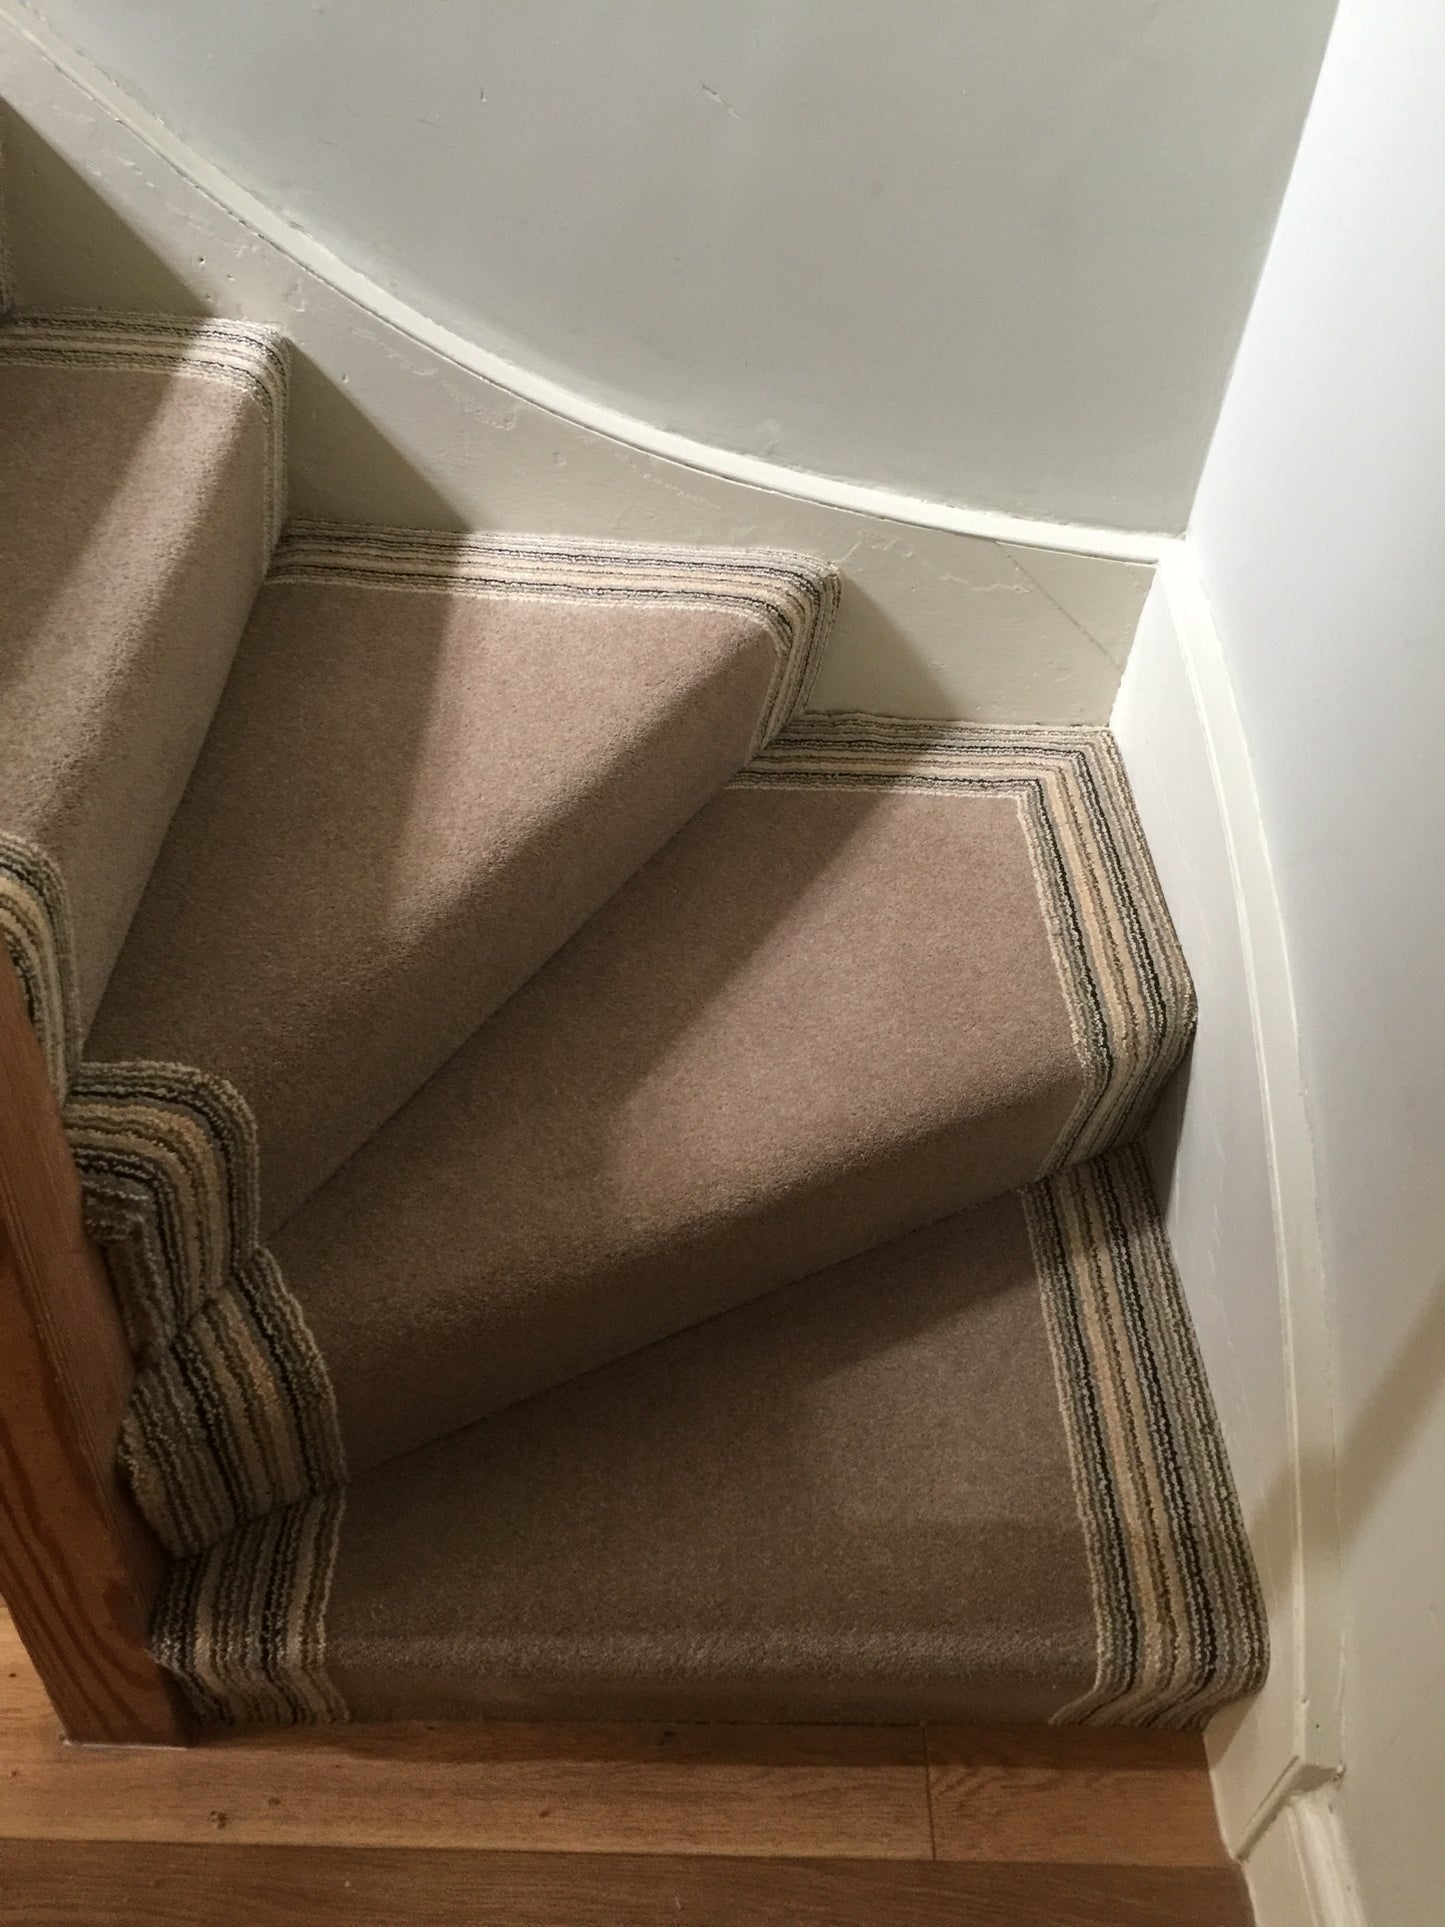 Ulster Carpets Grange Wilton Romney with Brintons Pure Living Retro Cord Fully Fitted Stair Carpet (per M)